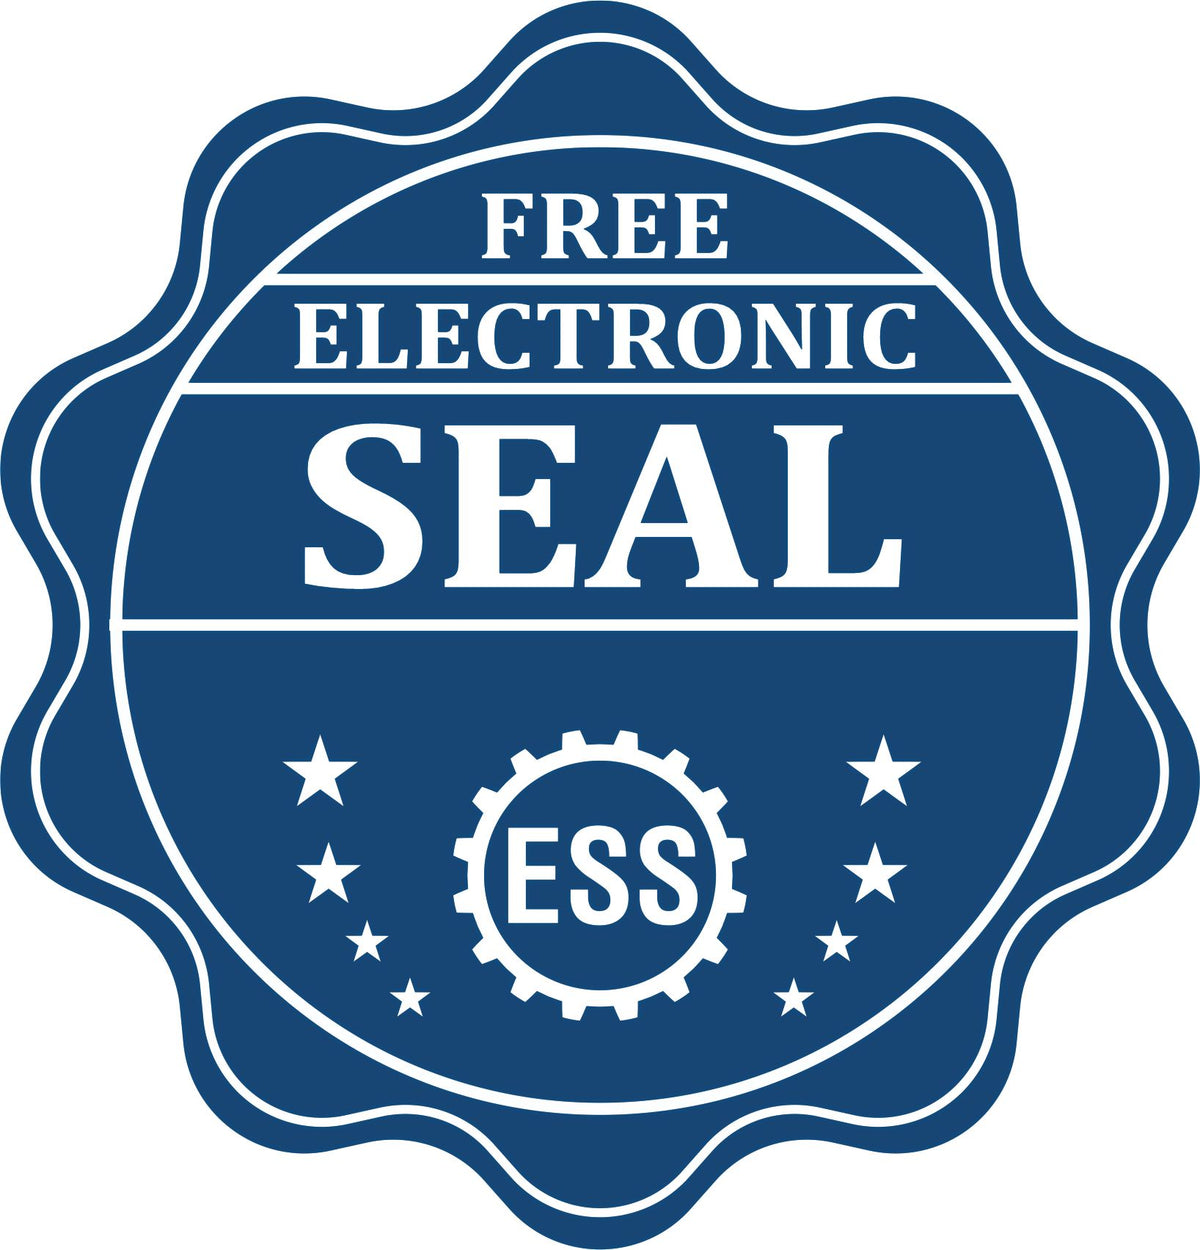 A badge showing a free electronic seal for the PSI Maryland Notary Stamp with stars and the ESS gear on the emblem.